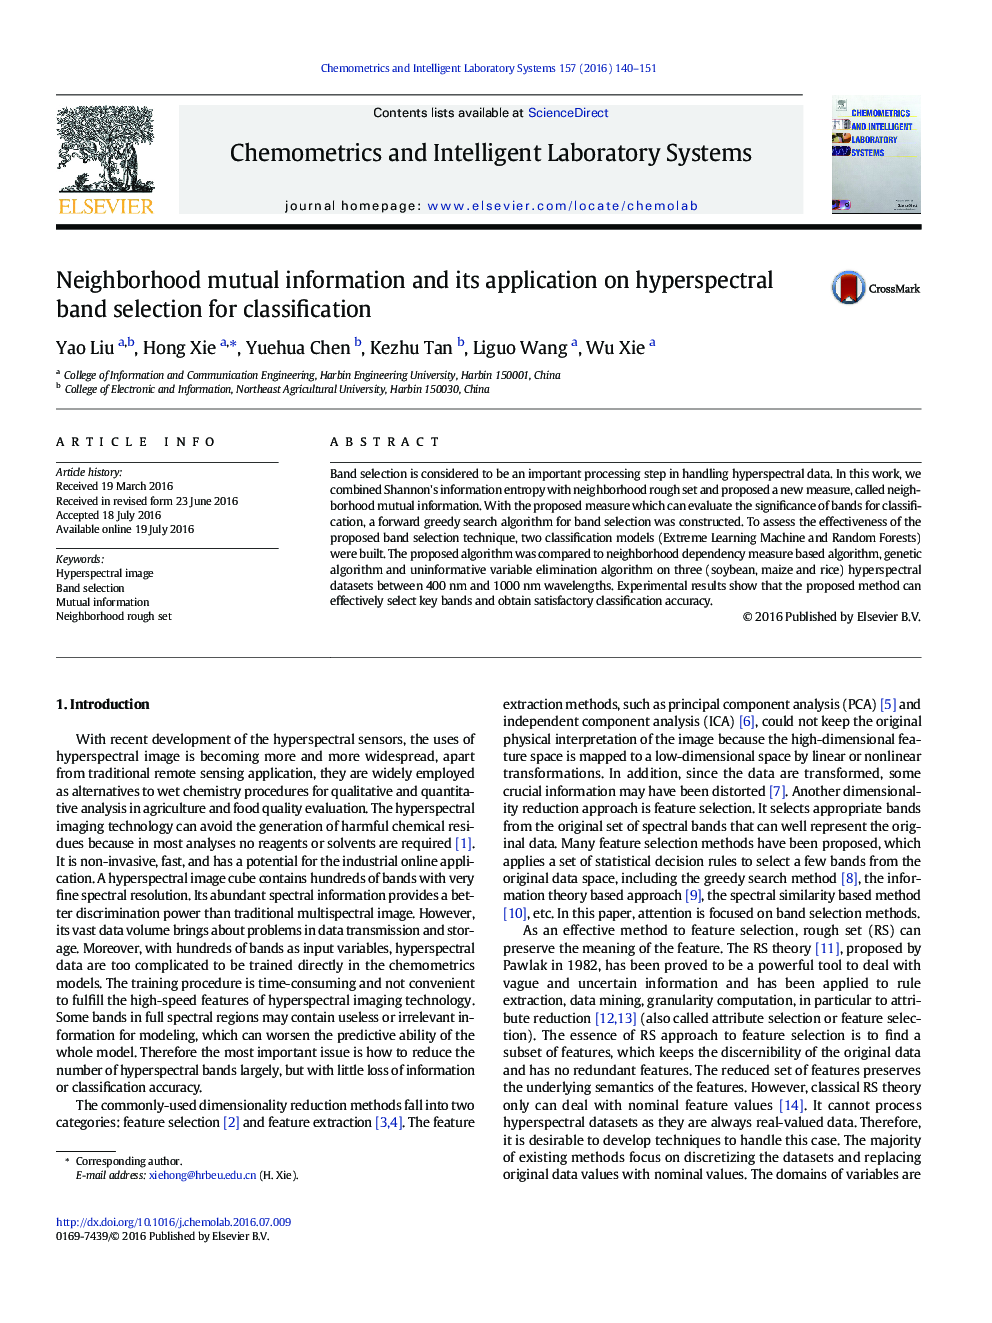 Neighborhood mutual information and its application on hyperspectral band selection for classification